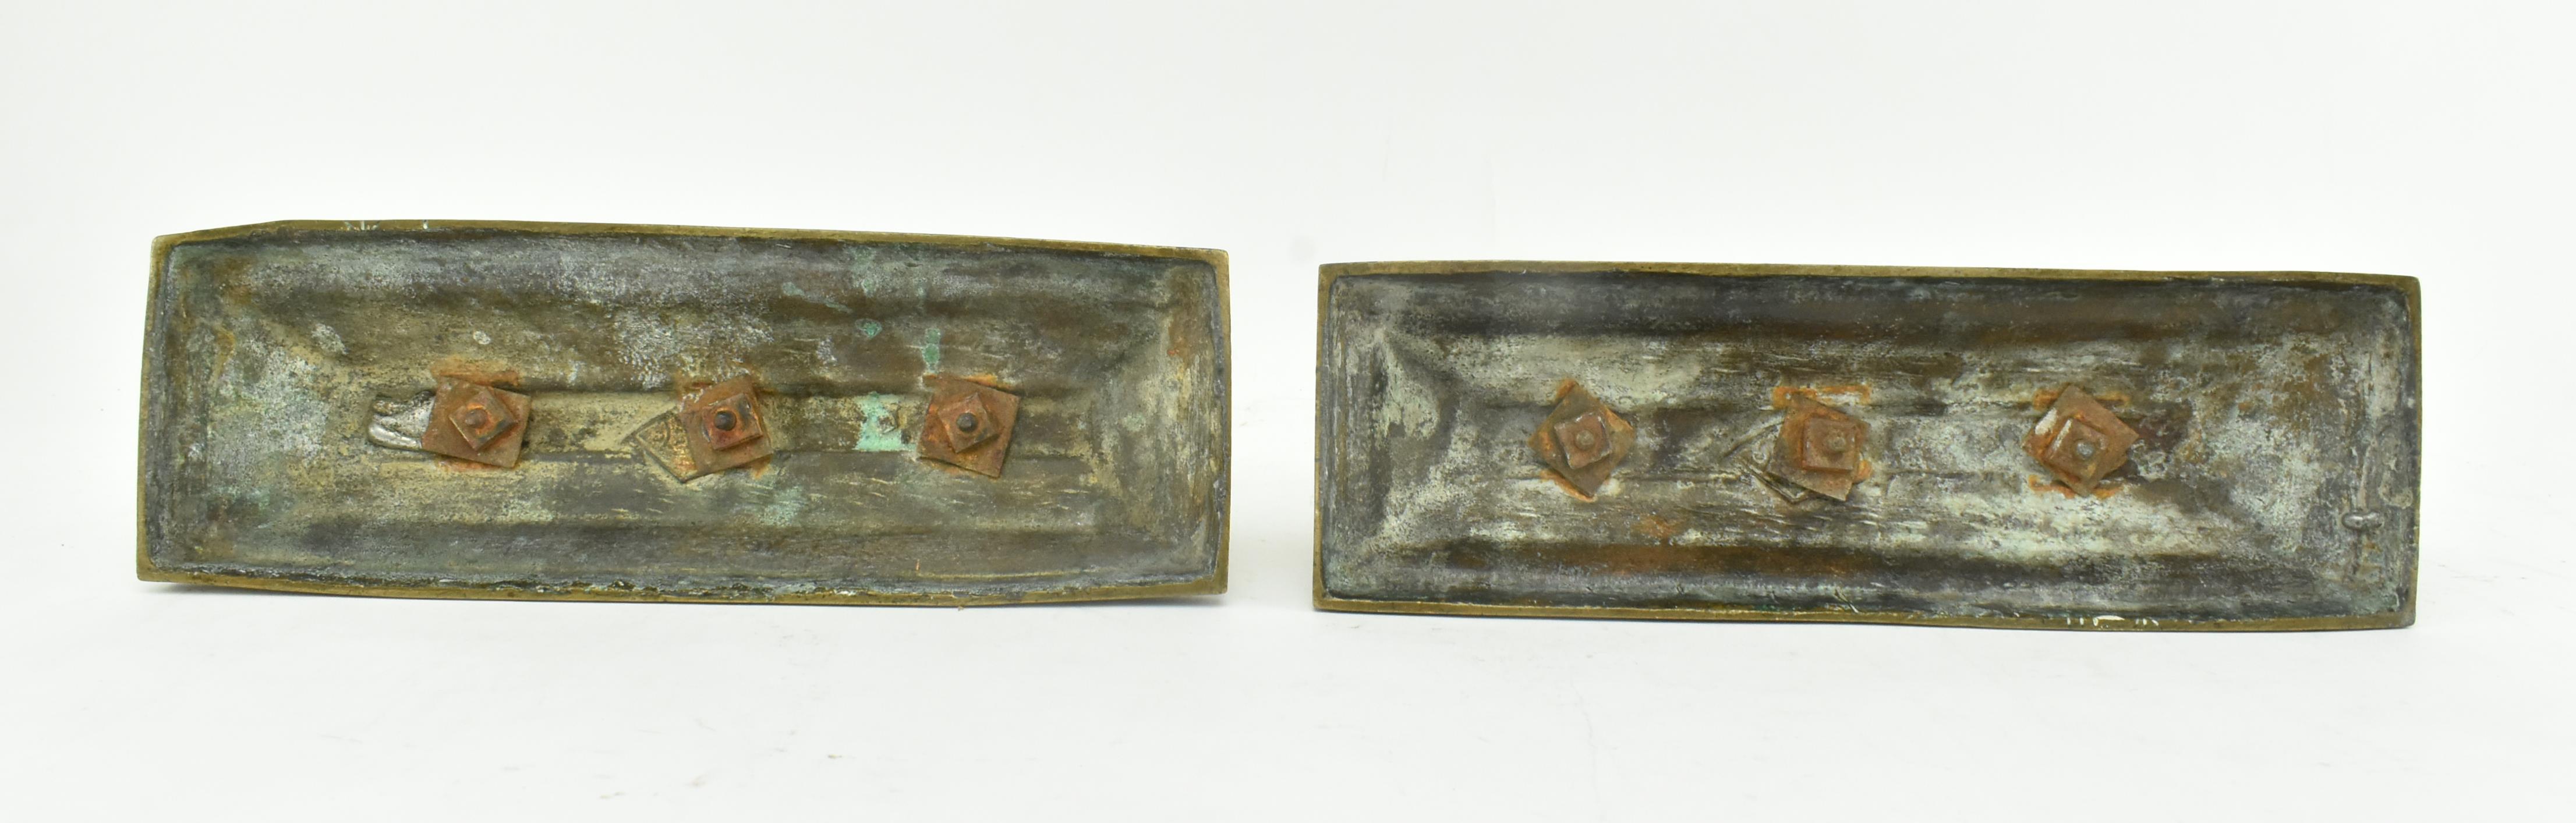 PAIR OF VICTORIAN BRASS DRAGON FIRE DOGS - Image 5 of 5